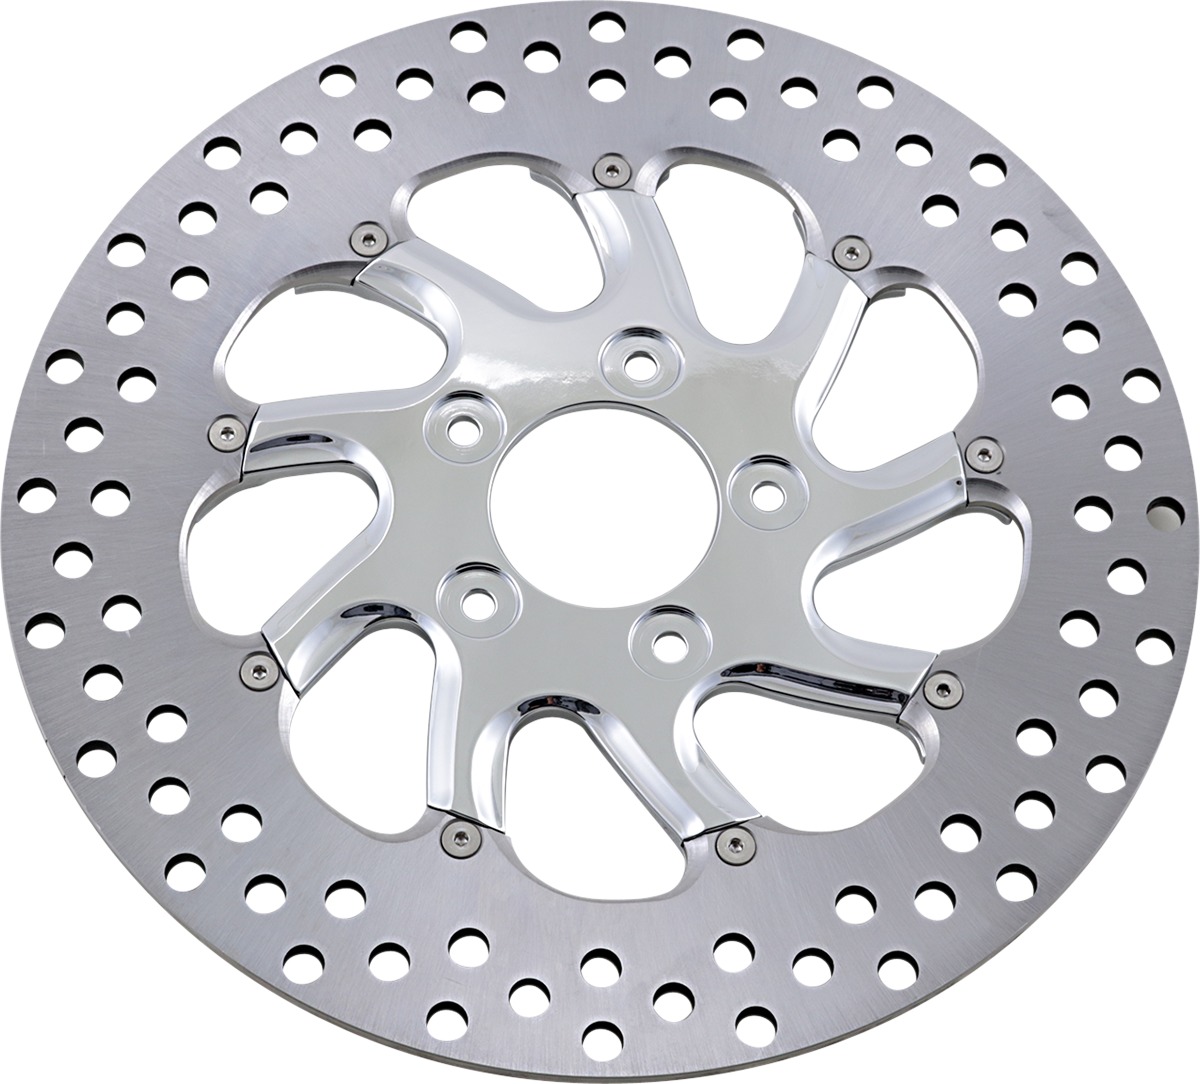 Torque Floating Front Right Brake Rotor 300mm Chrome - Harley - Click Image to Close